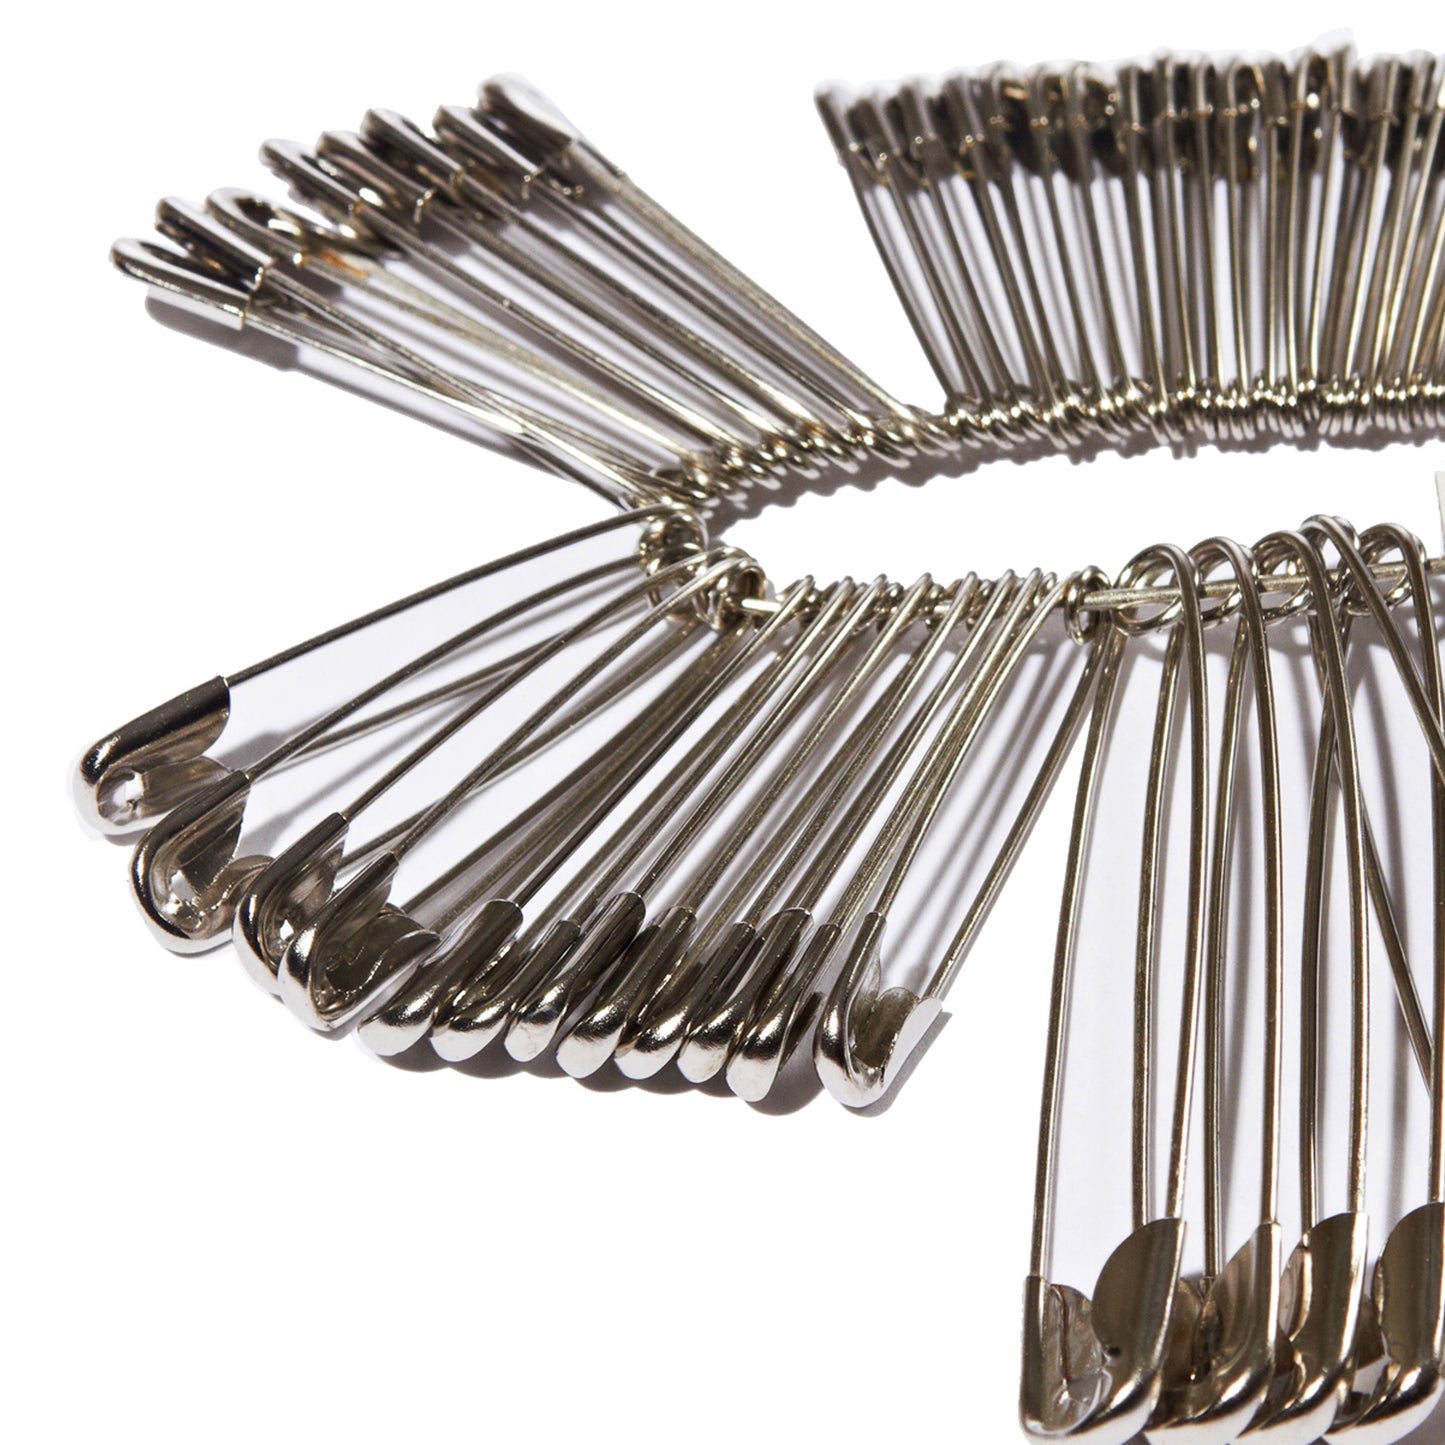 Safety Pins, Assorted Sizes, 50 Per Pack, 12 Packs